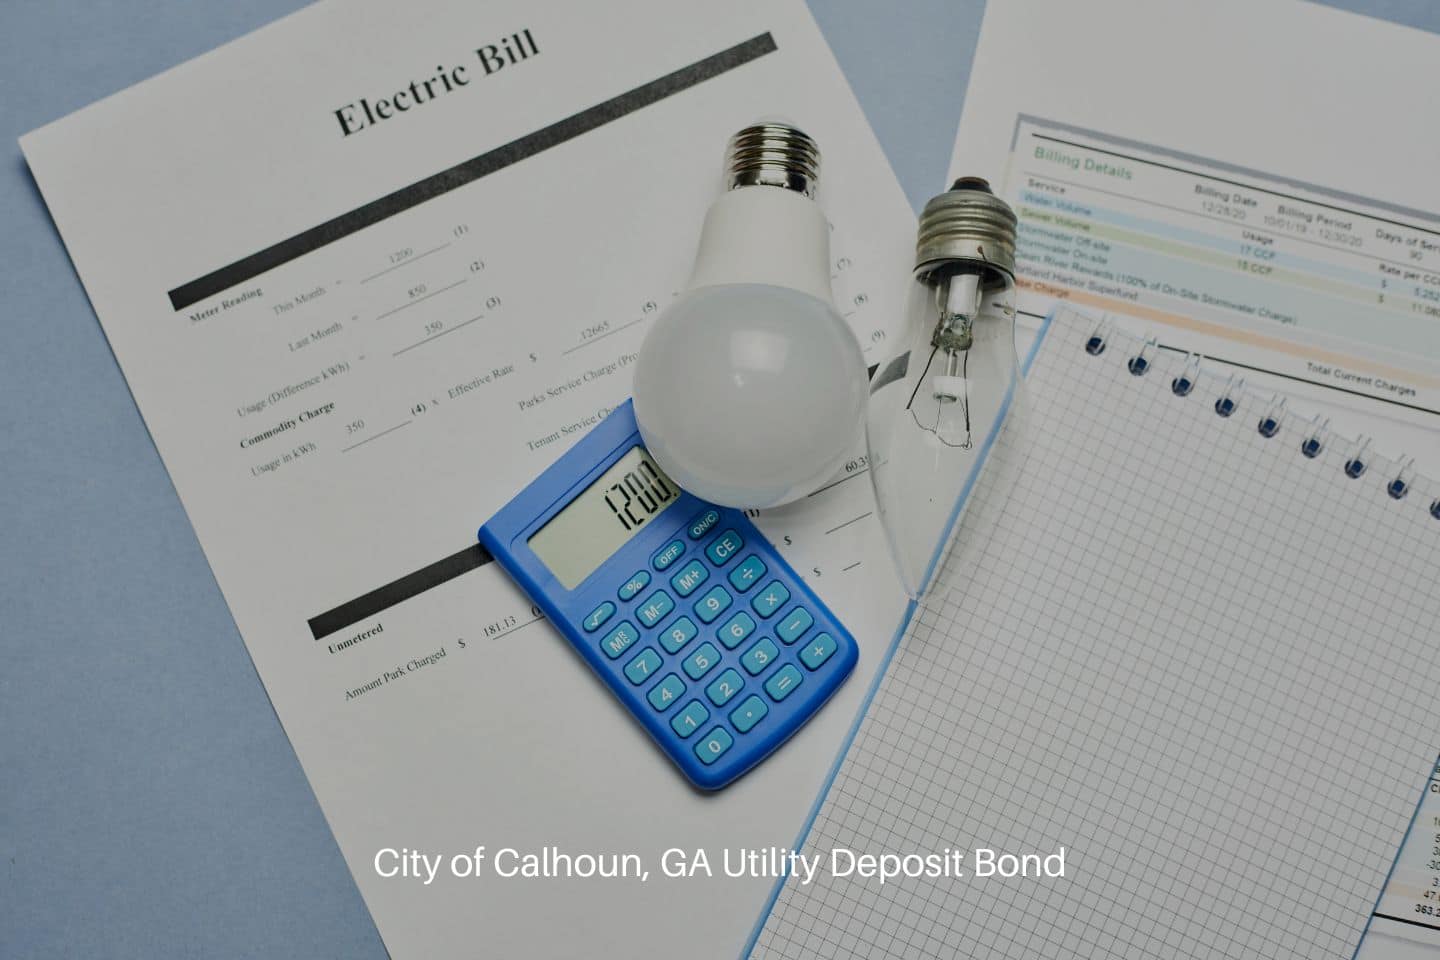 City of Calhoun, GA Utility Deposit Bond - Monthly utility bill, Bulb, and a calculator and note.